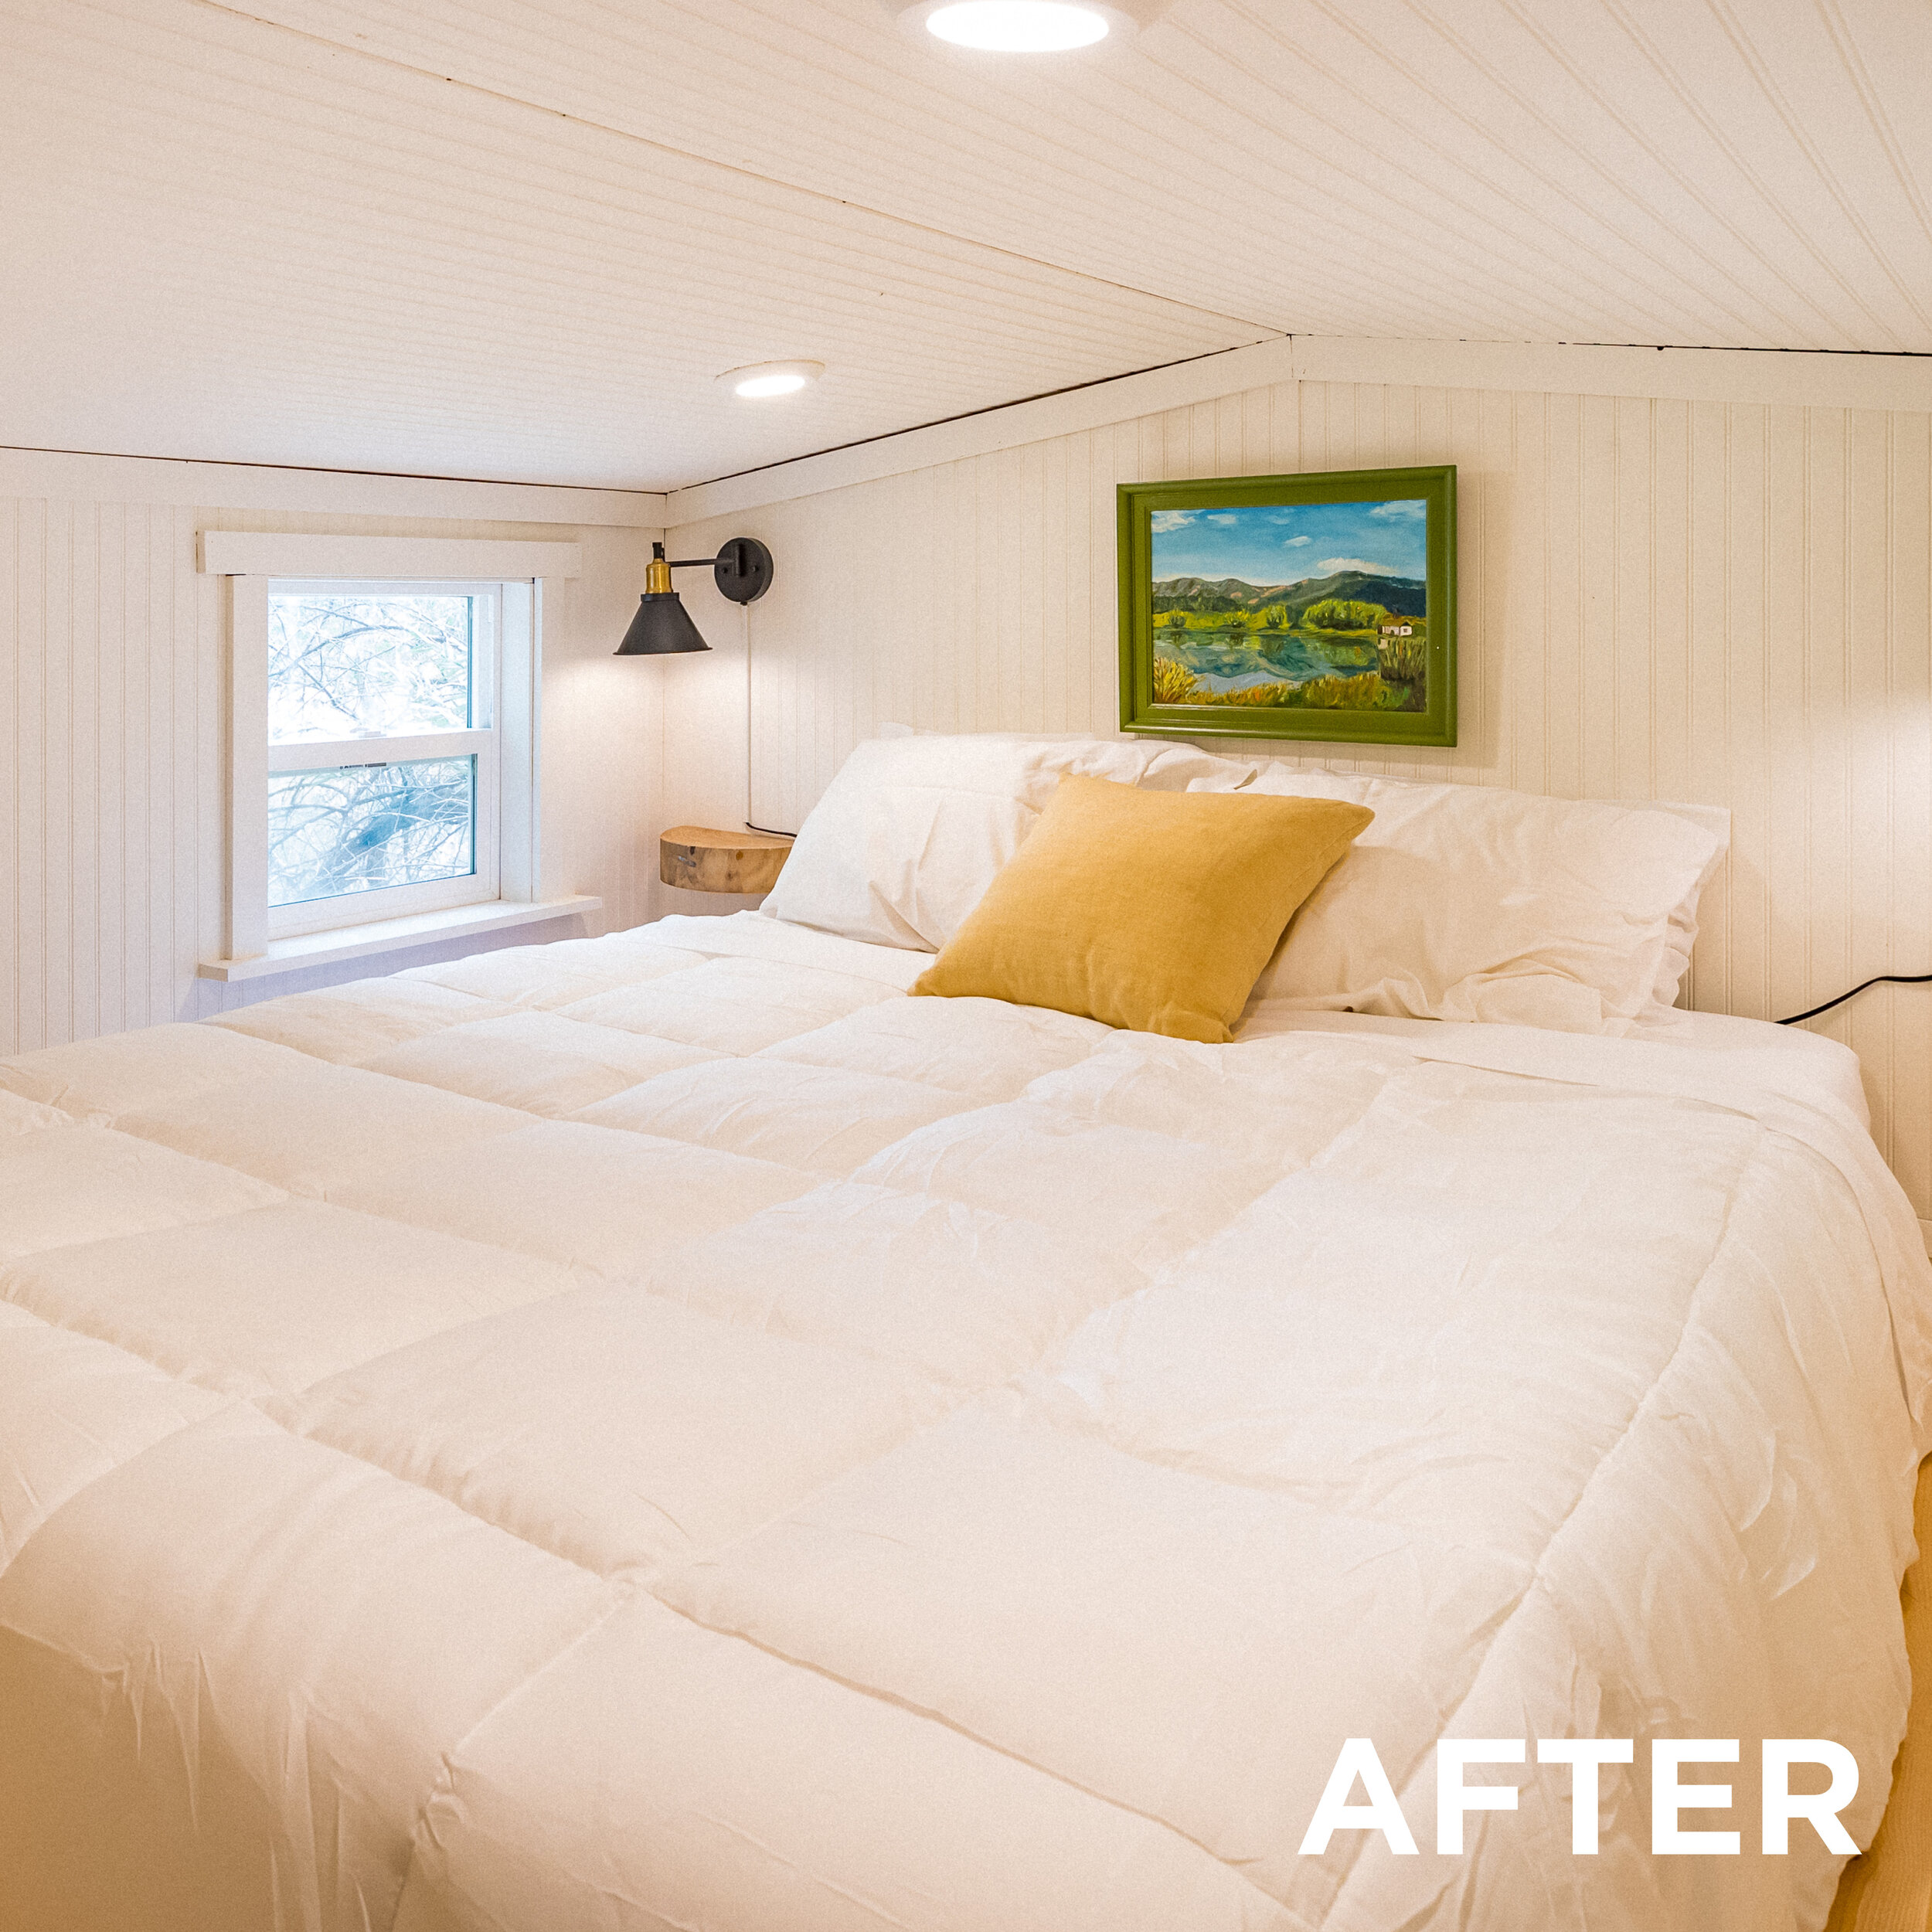 BEFORE & AFTER MARY TINY HOUSE6.jpg